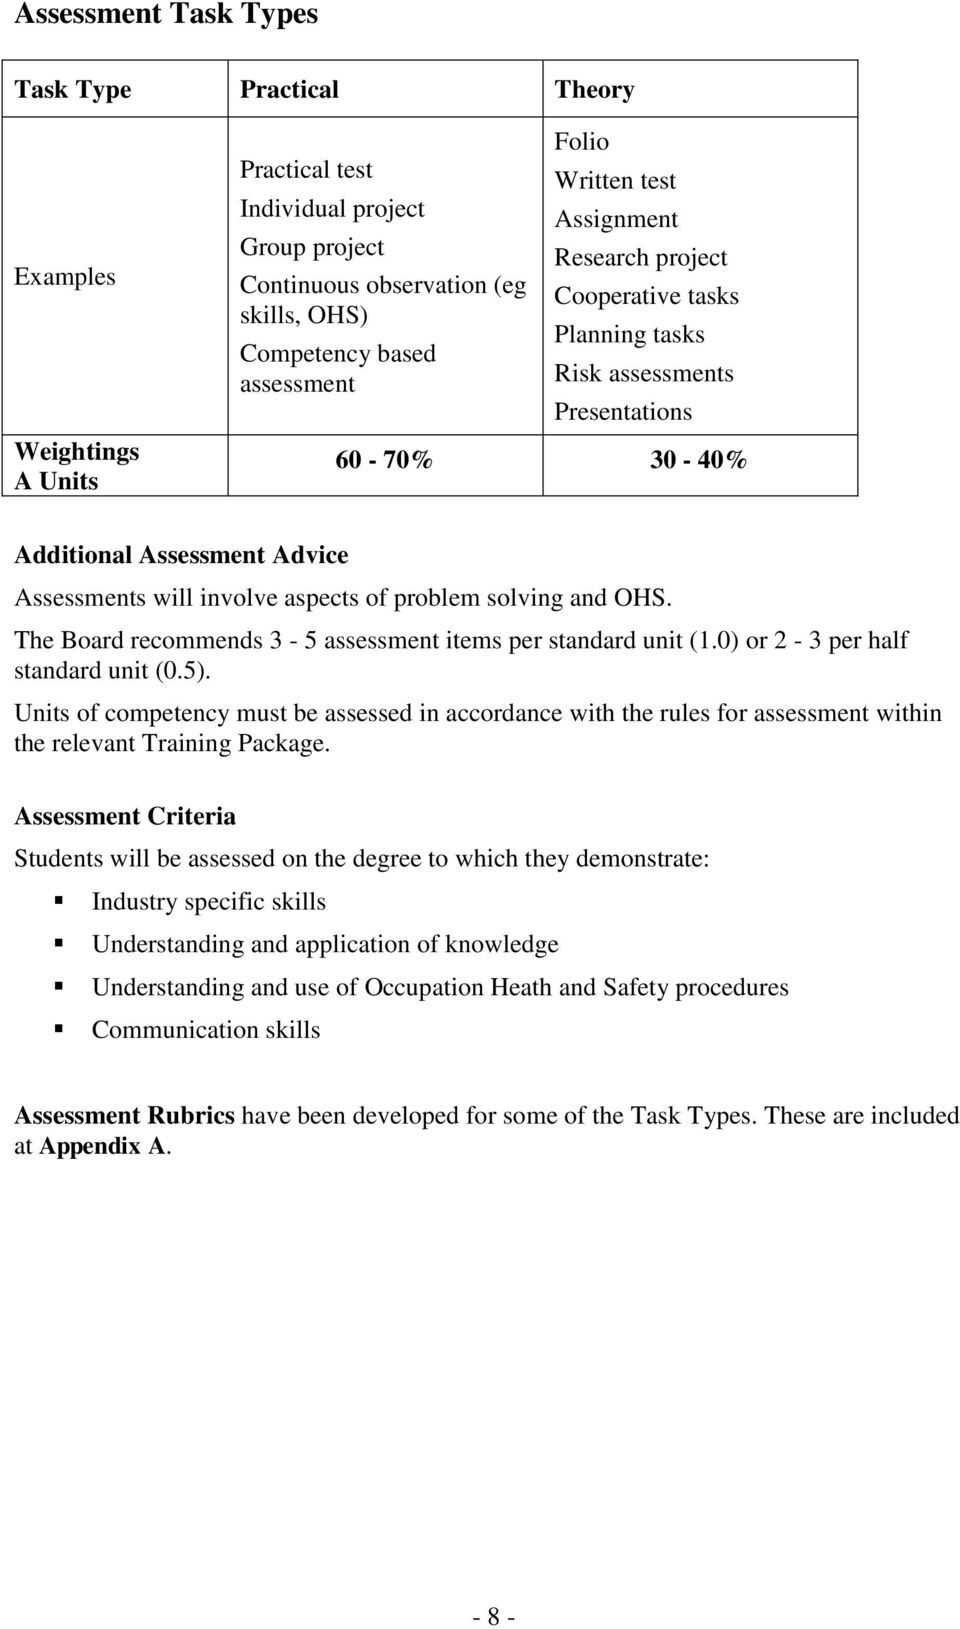 and OHS. The Board recommends 3-5 assessment items per standard (1.0) or 2-3 per half standard (0.5).